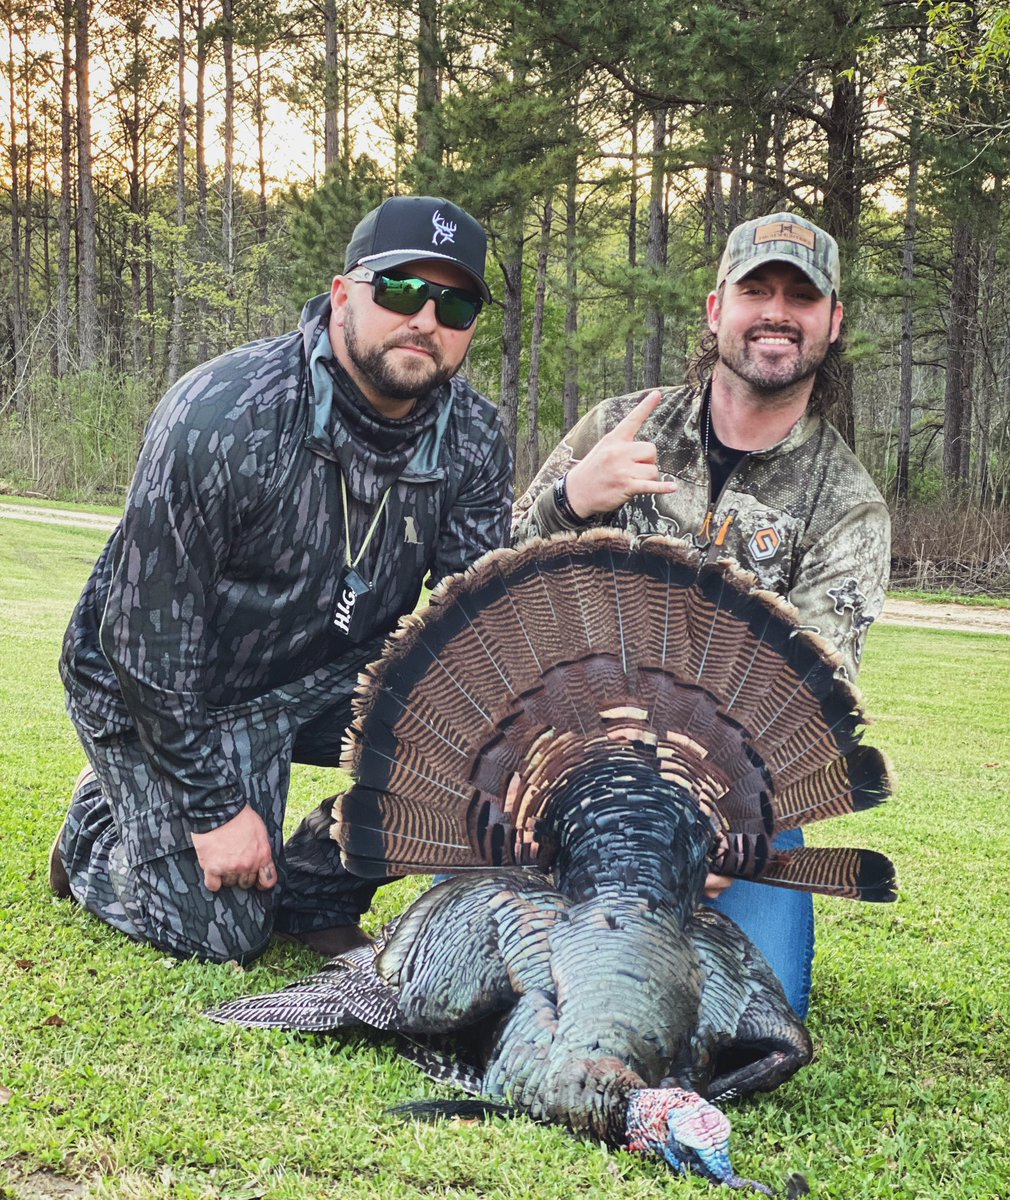 The man @tylerfarr sang that love song and torched him one in BAMA! Great sharing camp brother! #AGobWalksIntoTFarr #turkeybefloppin